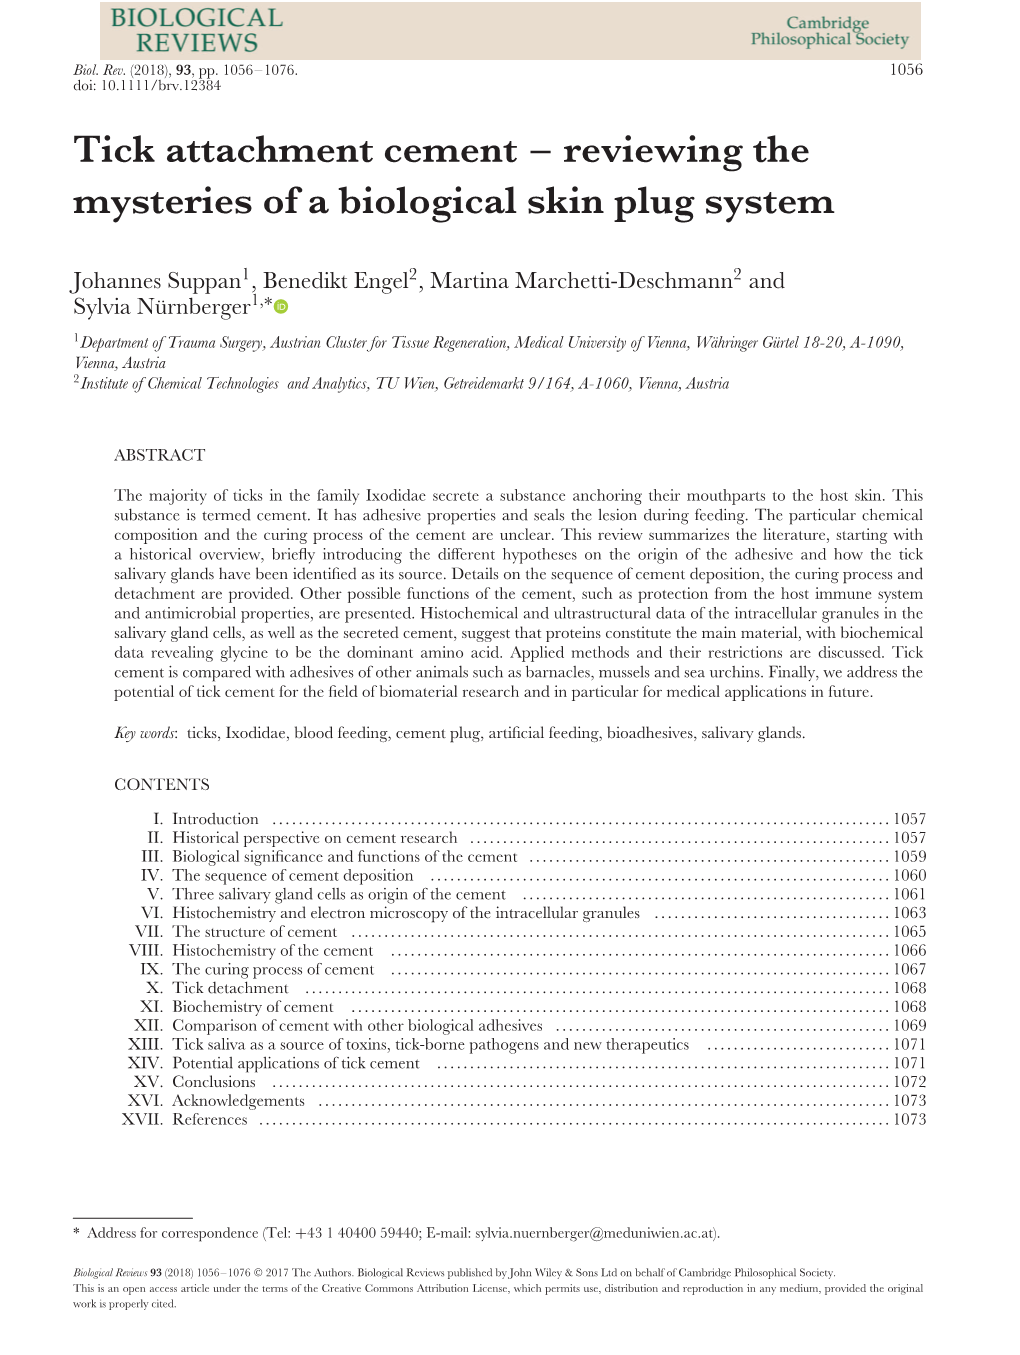 Tick Attachment Cement – Reviewing the Mysteries of a Biological Skin Plug System